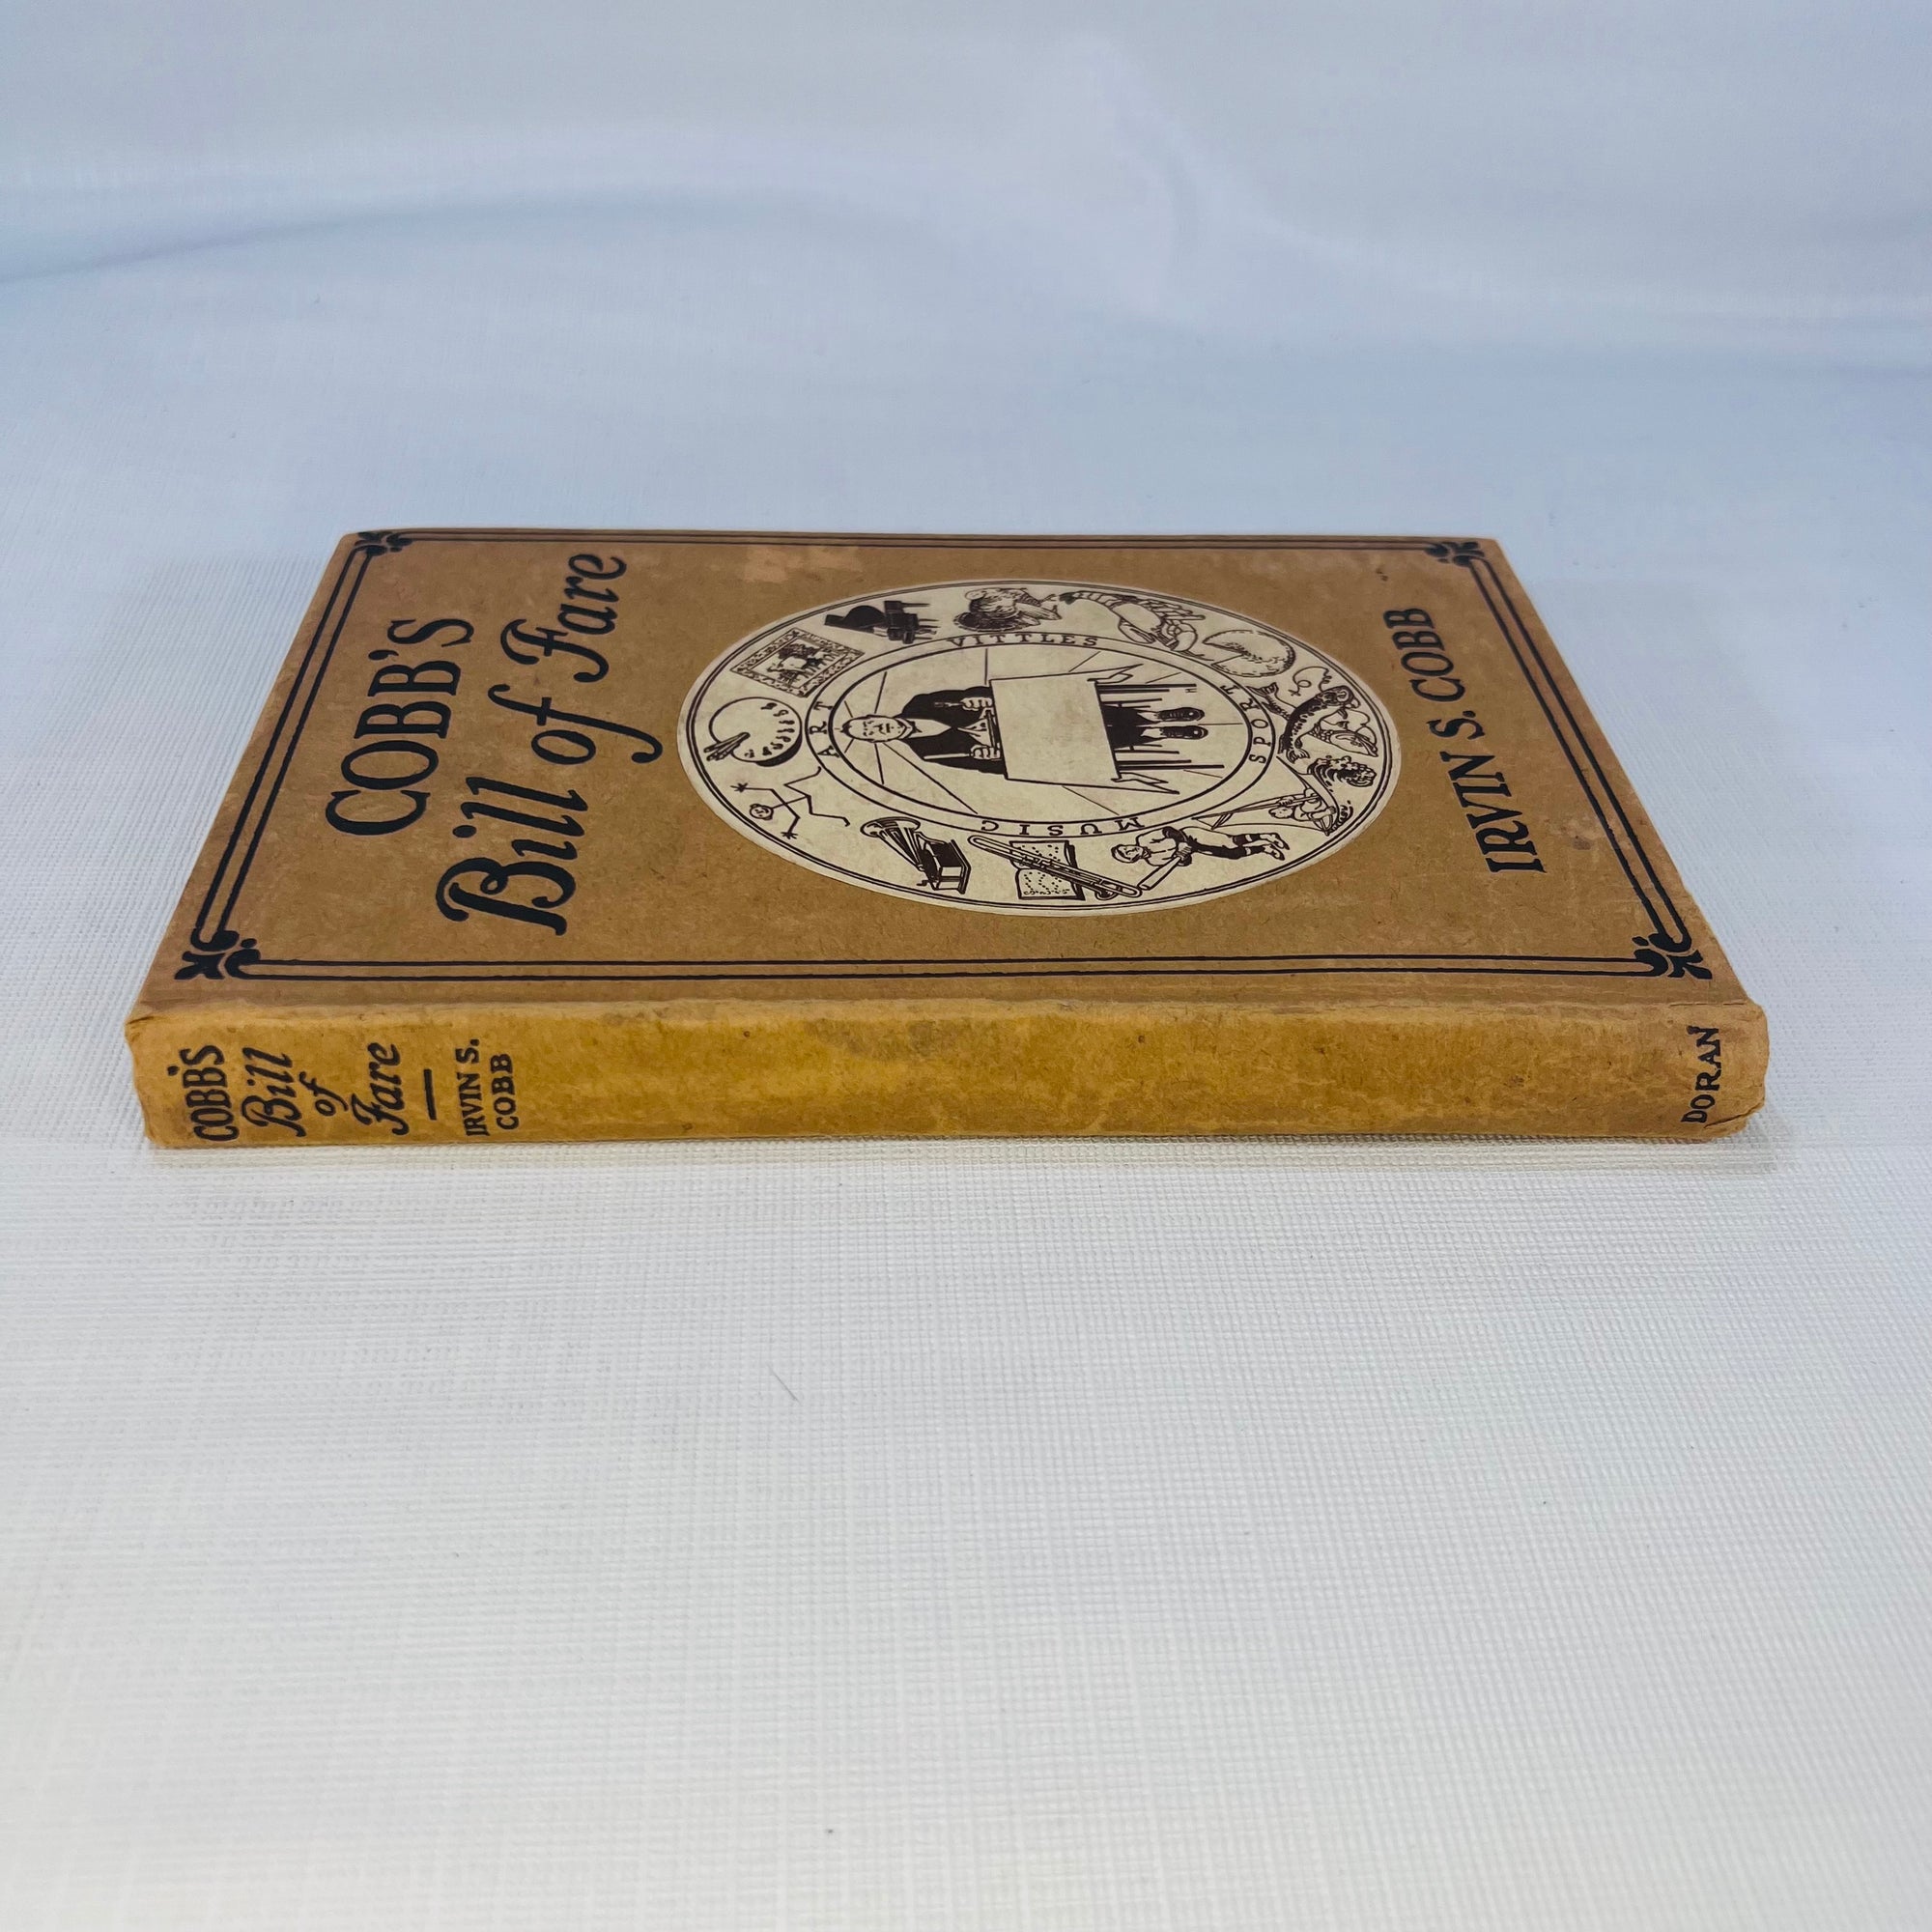 Cobb's Bill-of Fare by Irvin S. Cobb Illustrated by Peter Newell and James Preston 1913 George H. Doran Company